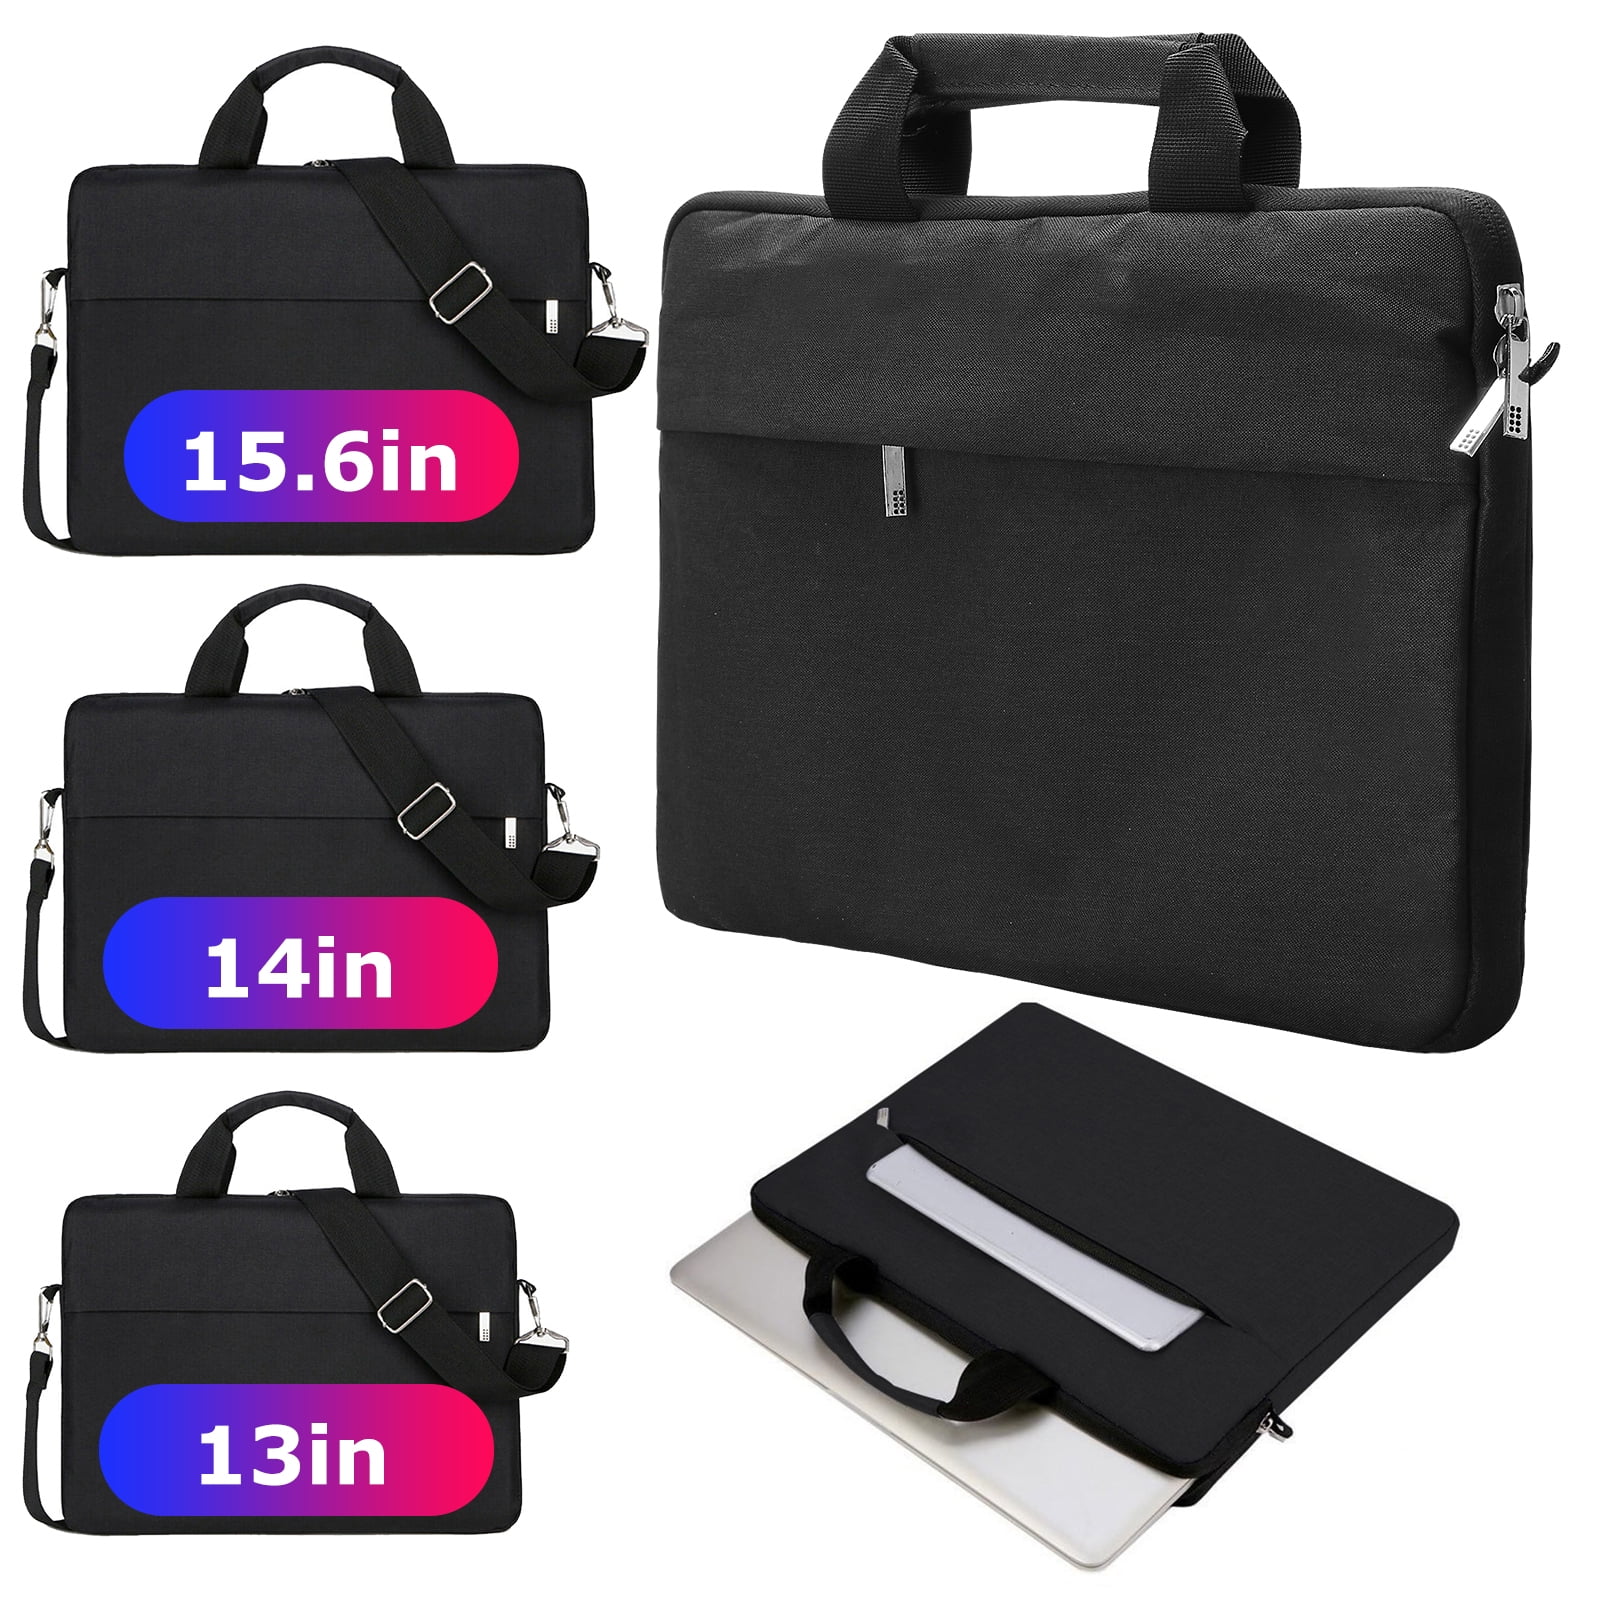 Sis-Ters Shockproof Laptop Bag Compatible for 13-15.6 Inch Laptop Computer 